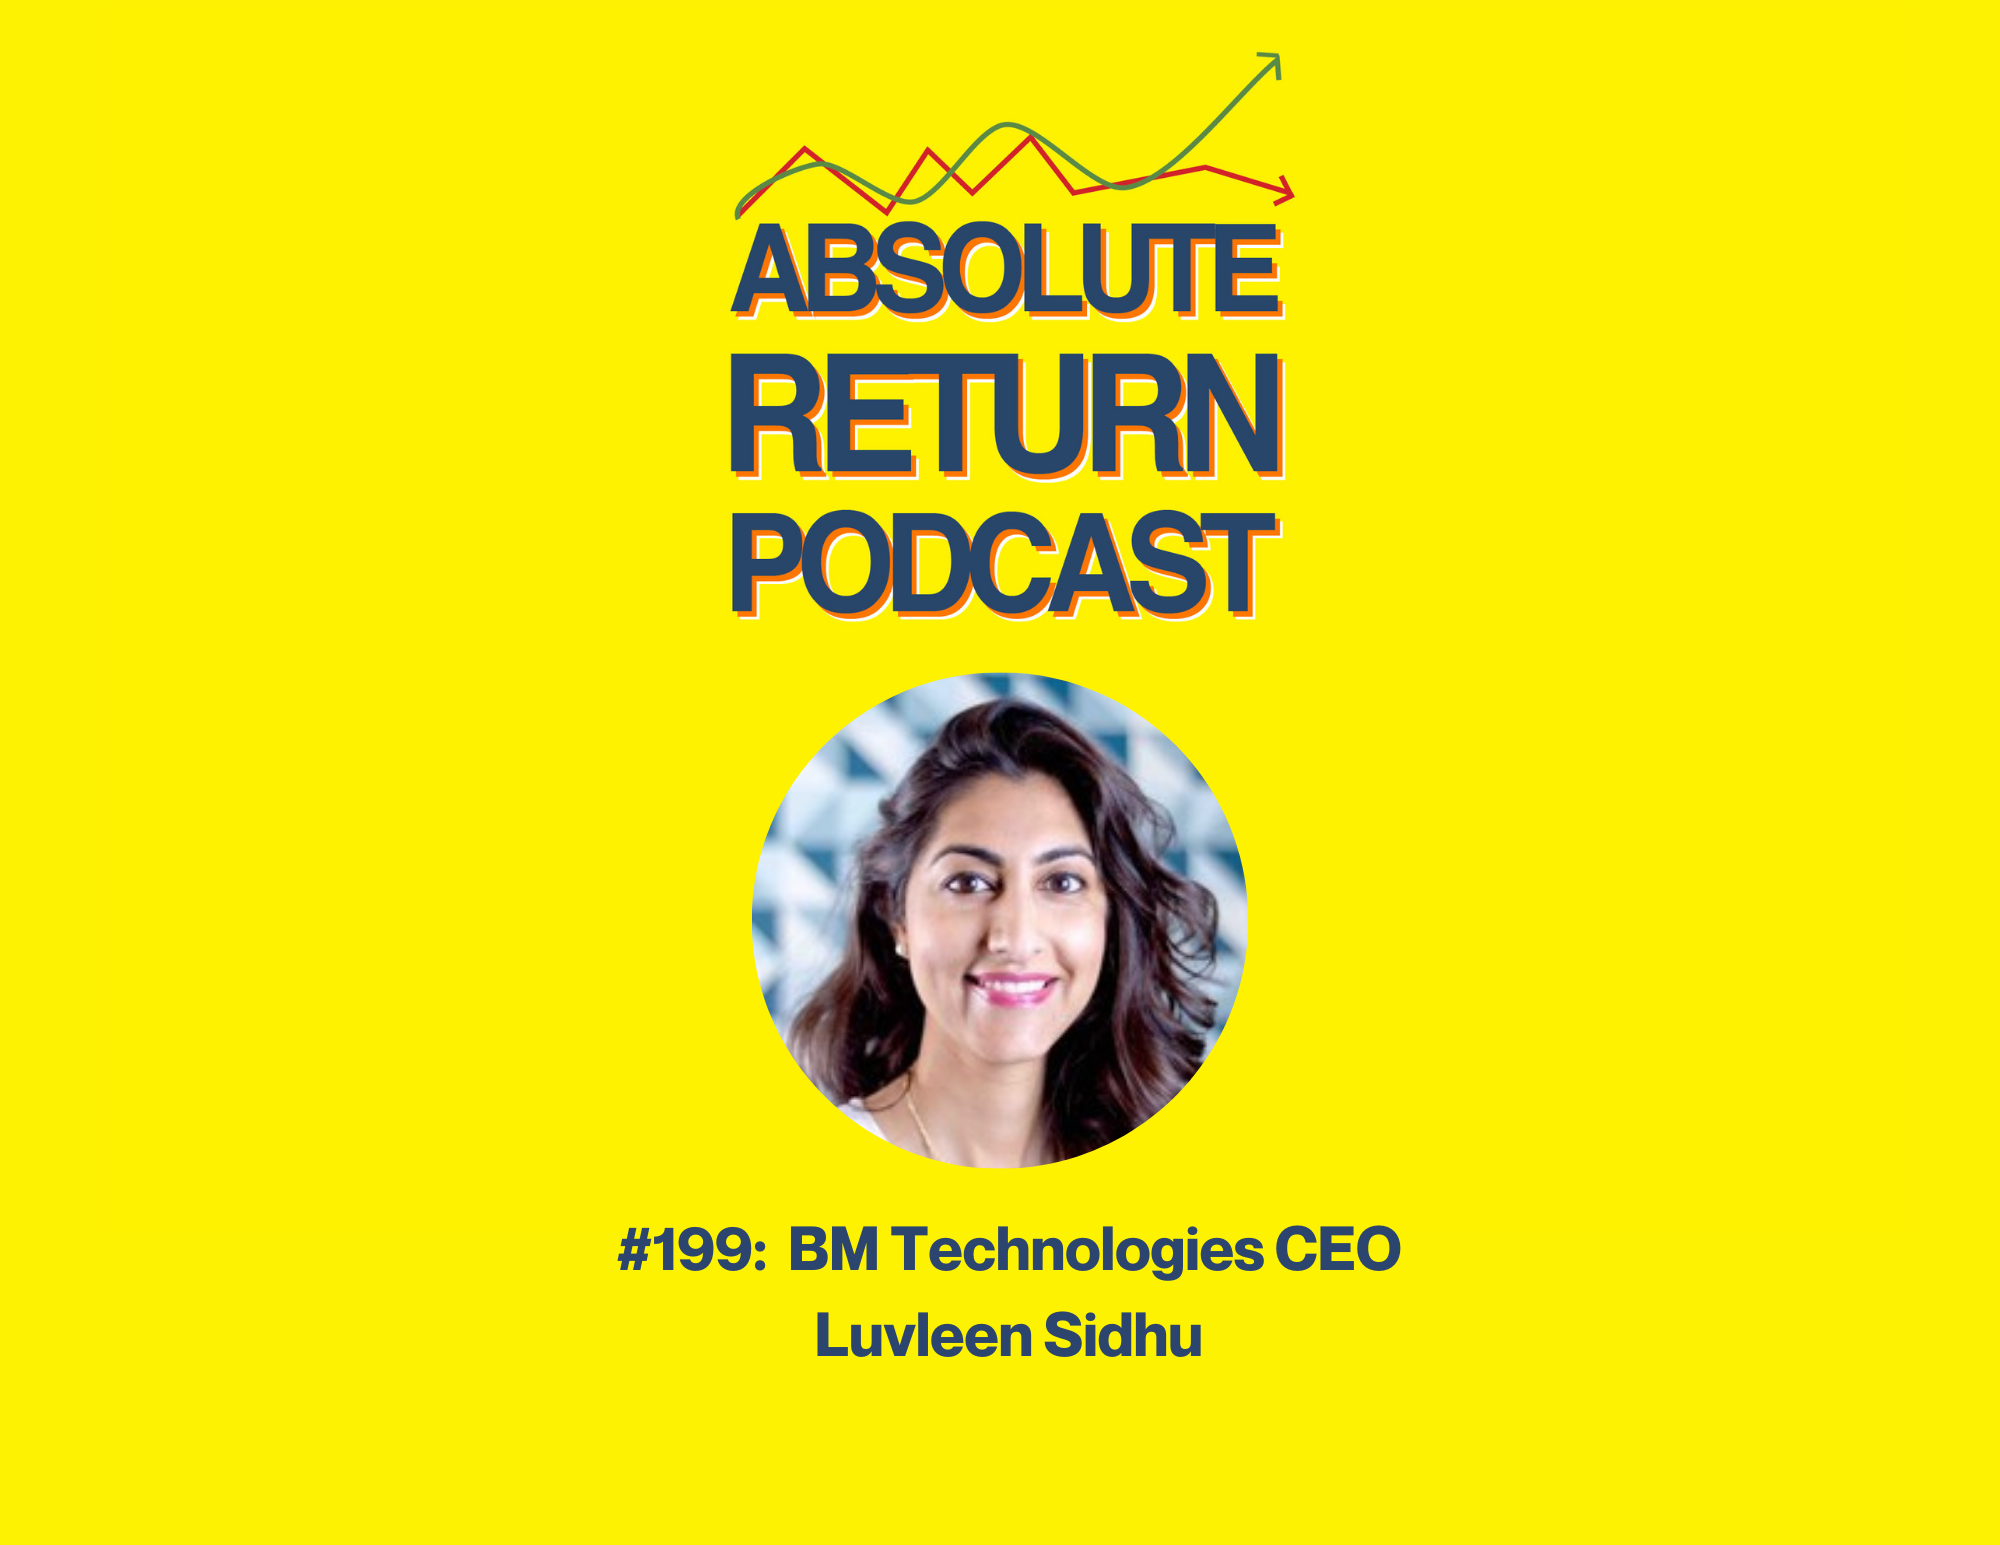 Absolute Return Podcast #199: Leadership Chat: BM Technologies CEO Luvleen Sidhu